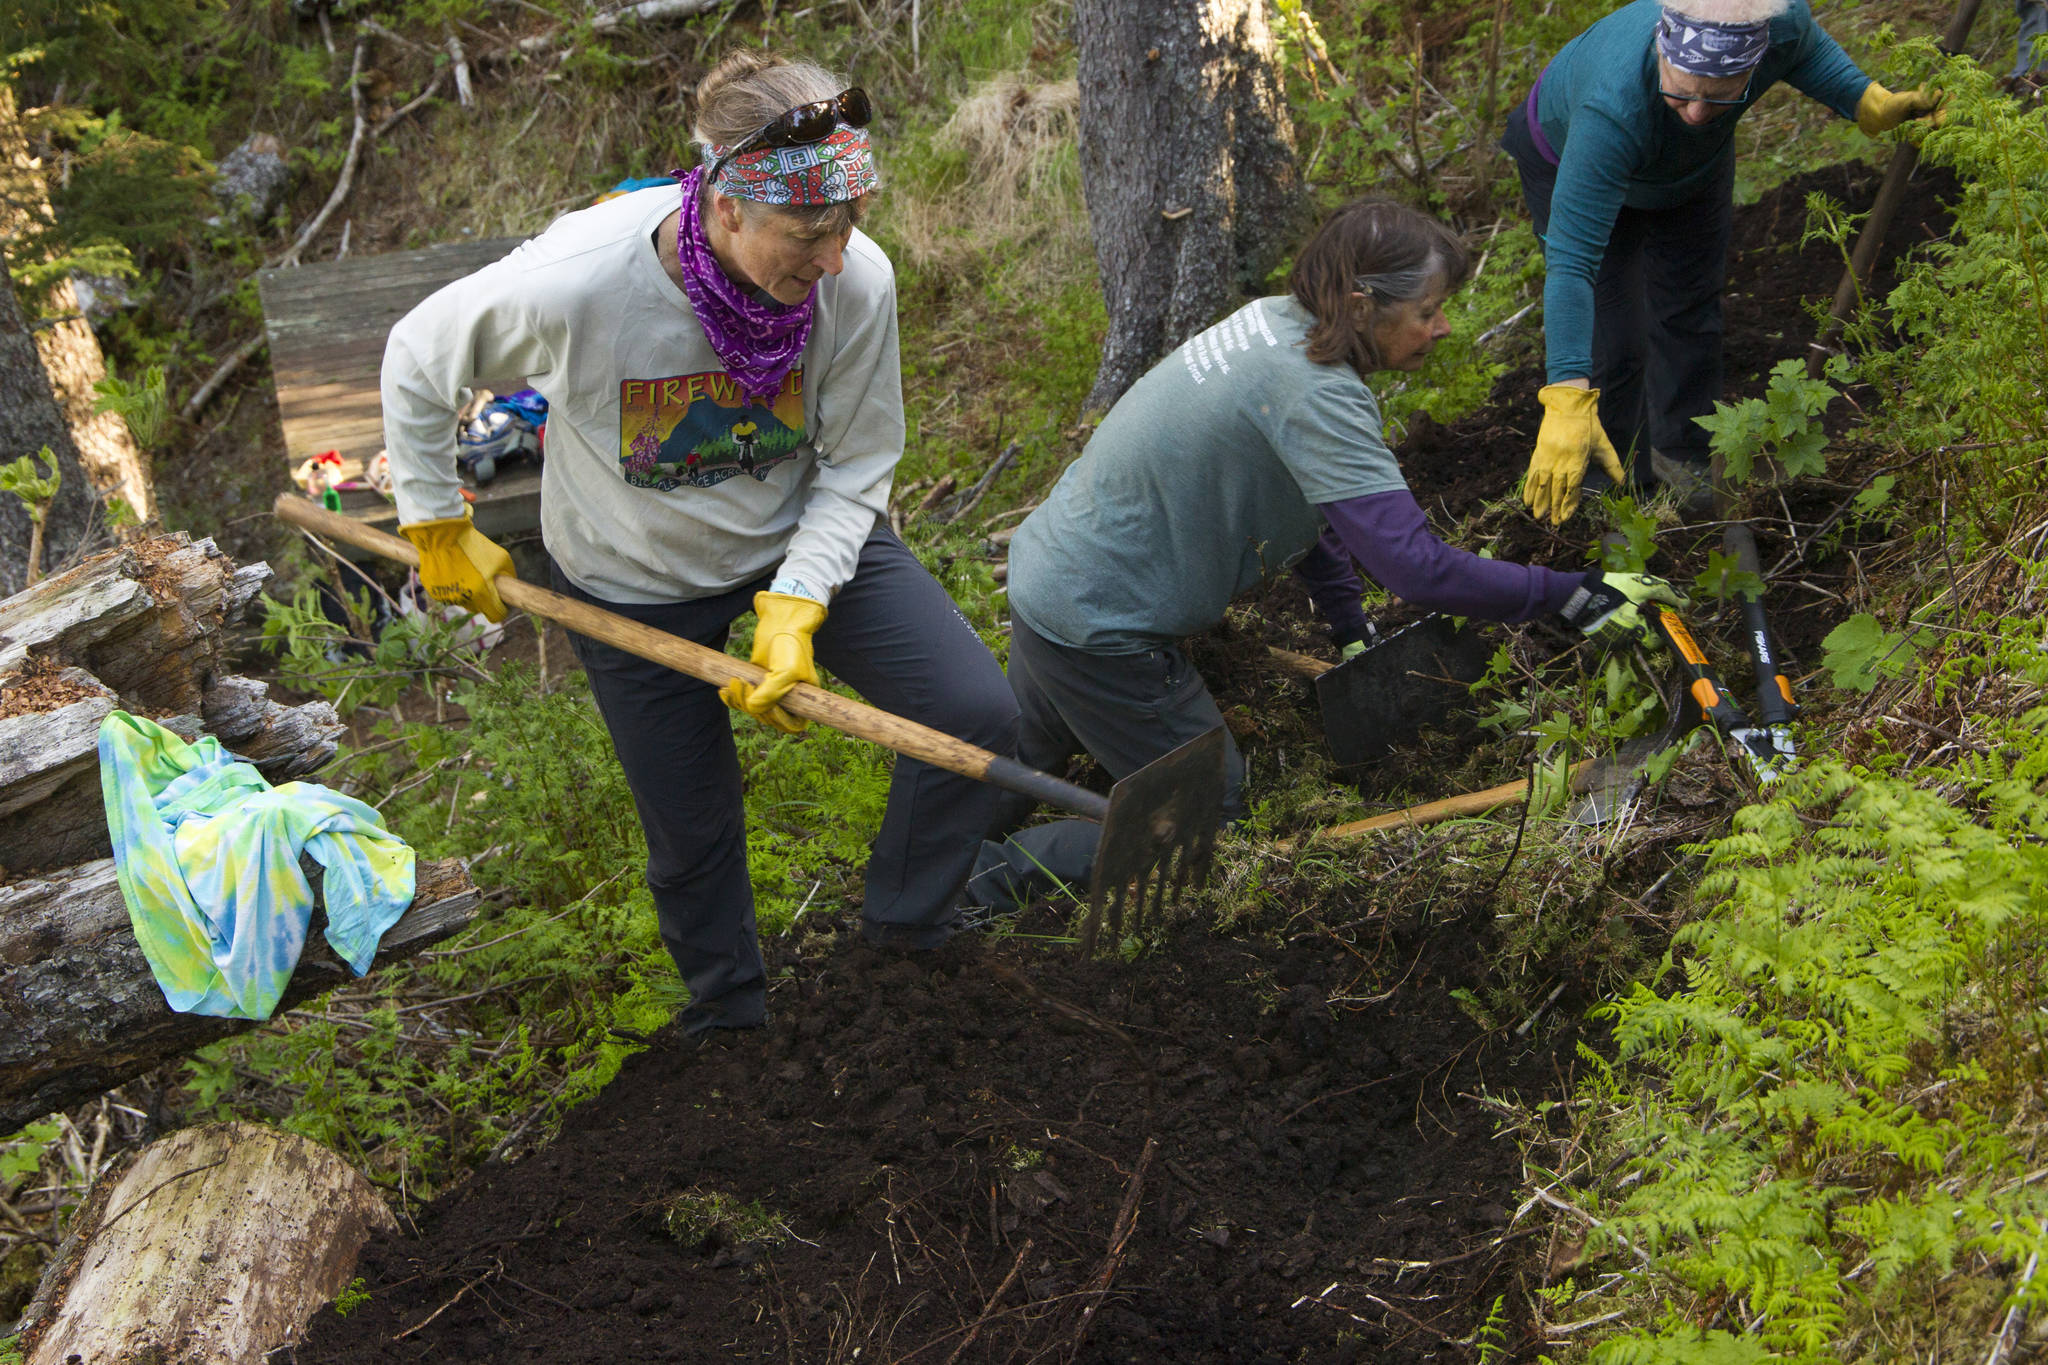 Kathy Sarns, Ruth Dickerson and Lyn Maslow work together to rebuild the trail tread at South Eldred Trail during National Trails Day. (Photo by Sarah Knapp/Homer News)